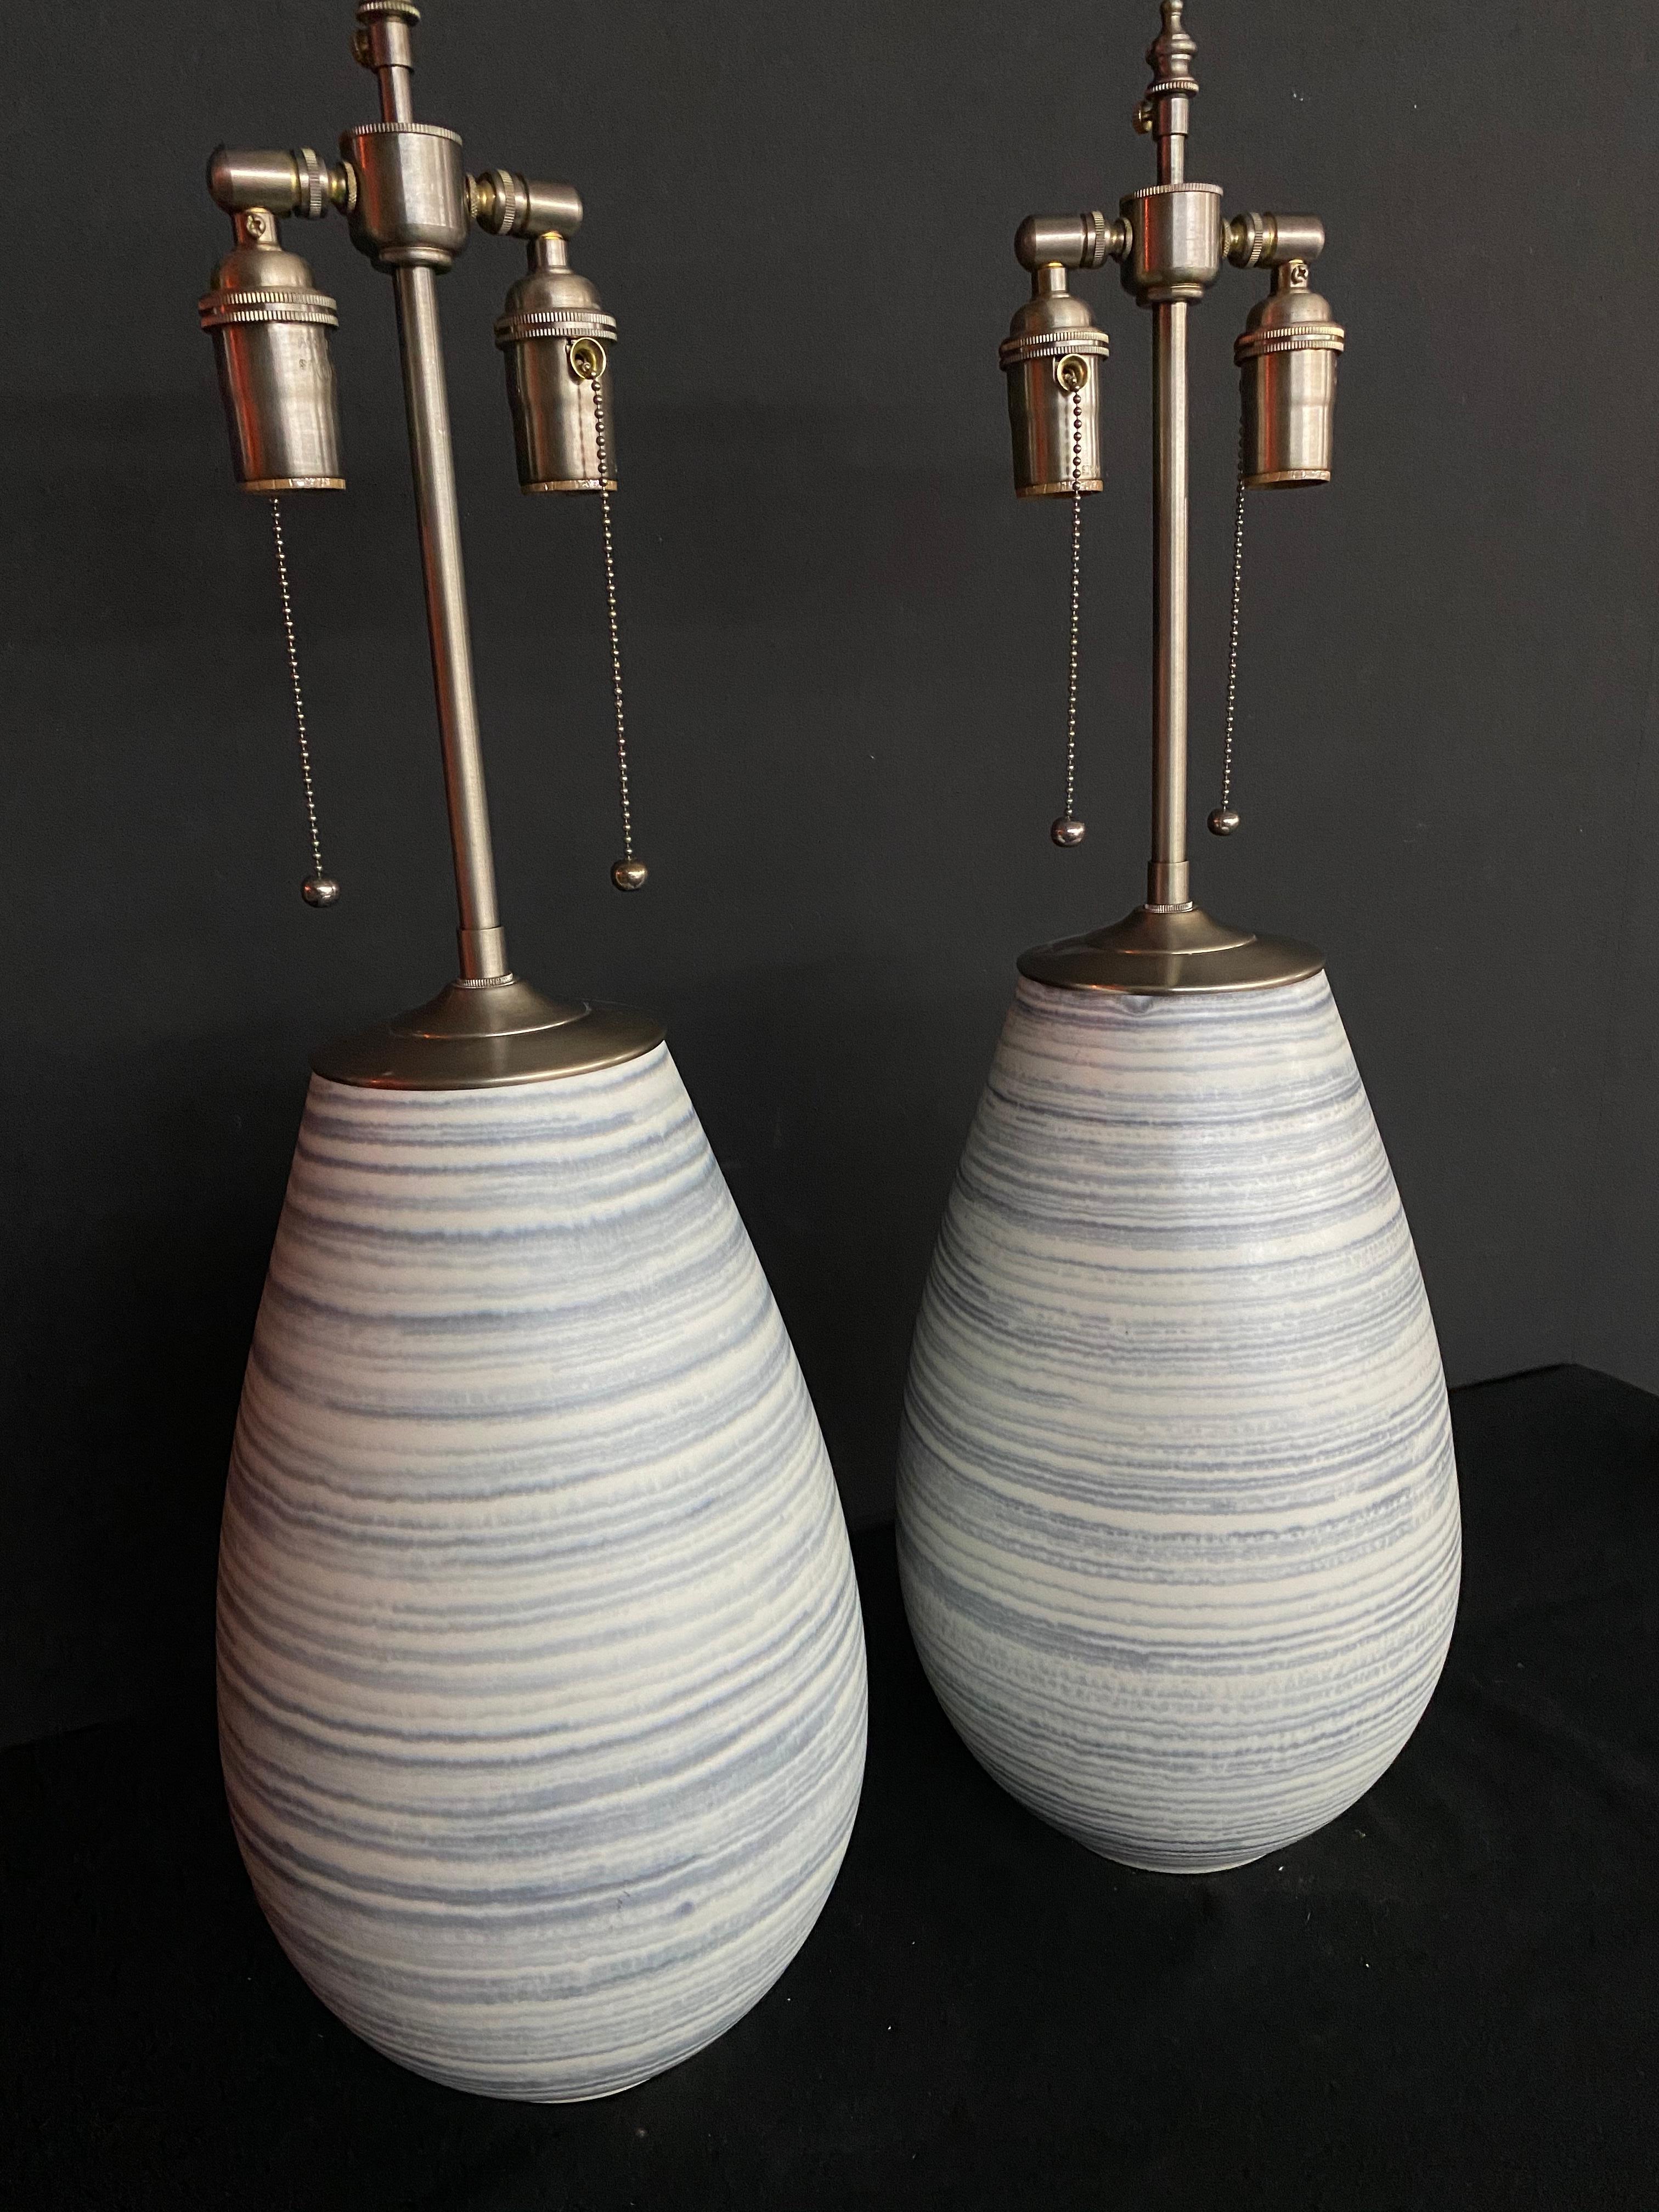 Spectacular pair of unique ceramic Orbs with lamp application. Our lamps have the unique distinction of being comprised of vases and vessels that we determine will make excellent lamps, then we convert them into lighting. As a result, there are none